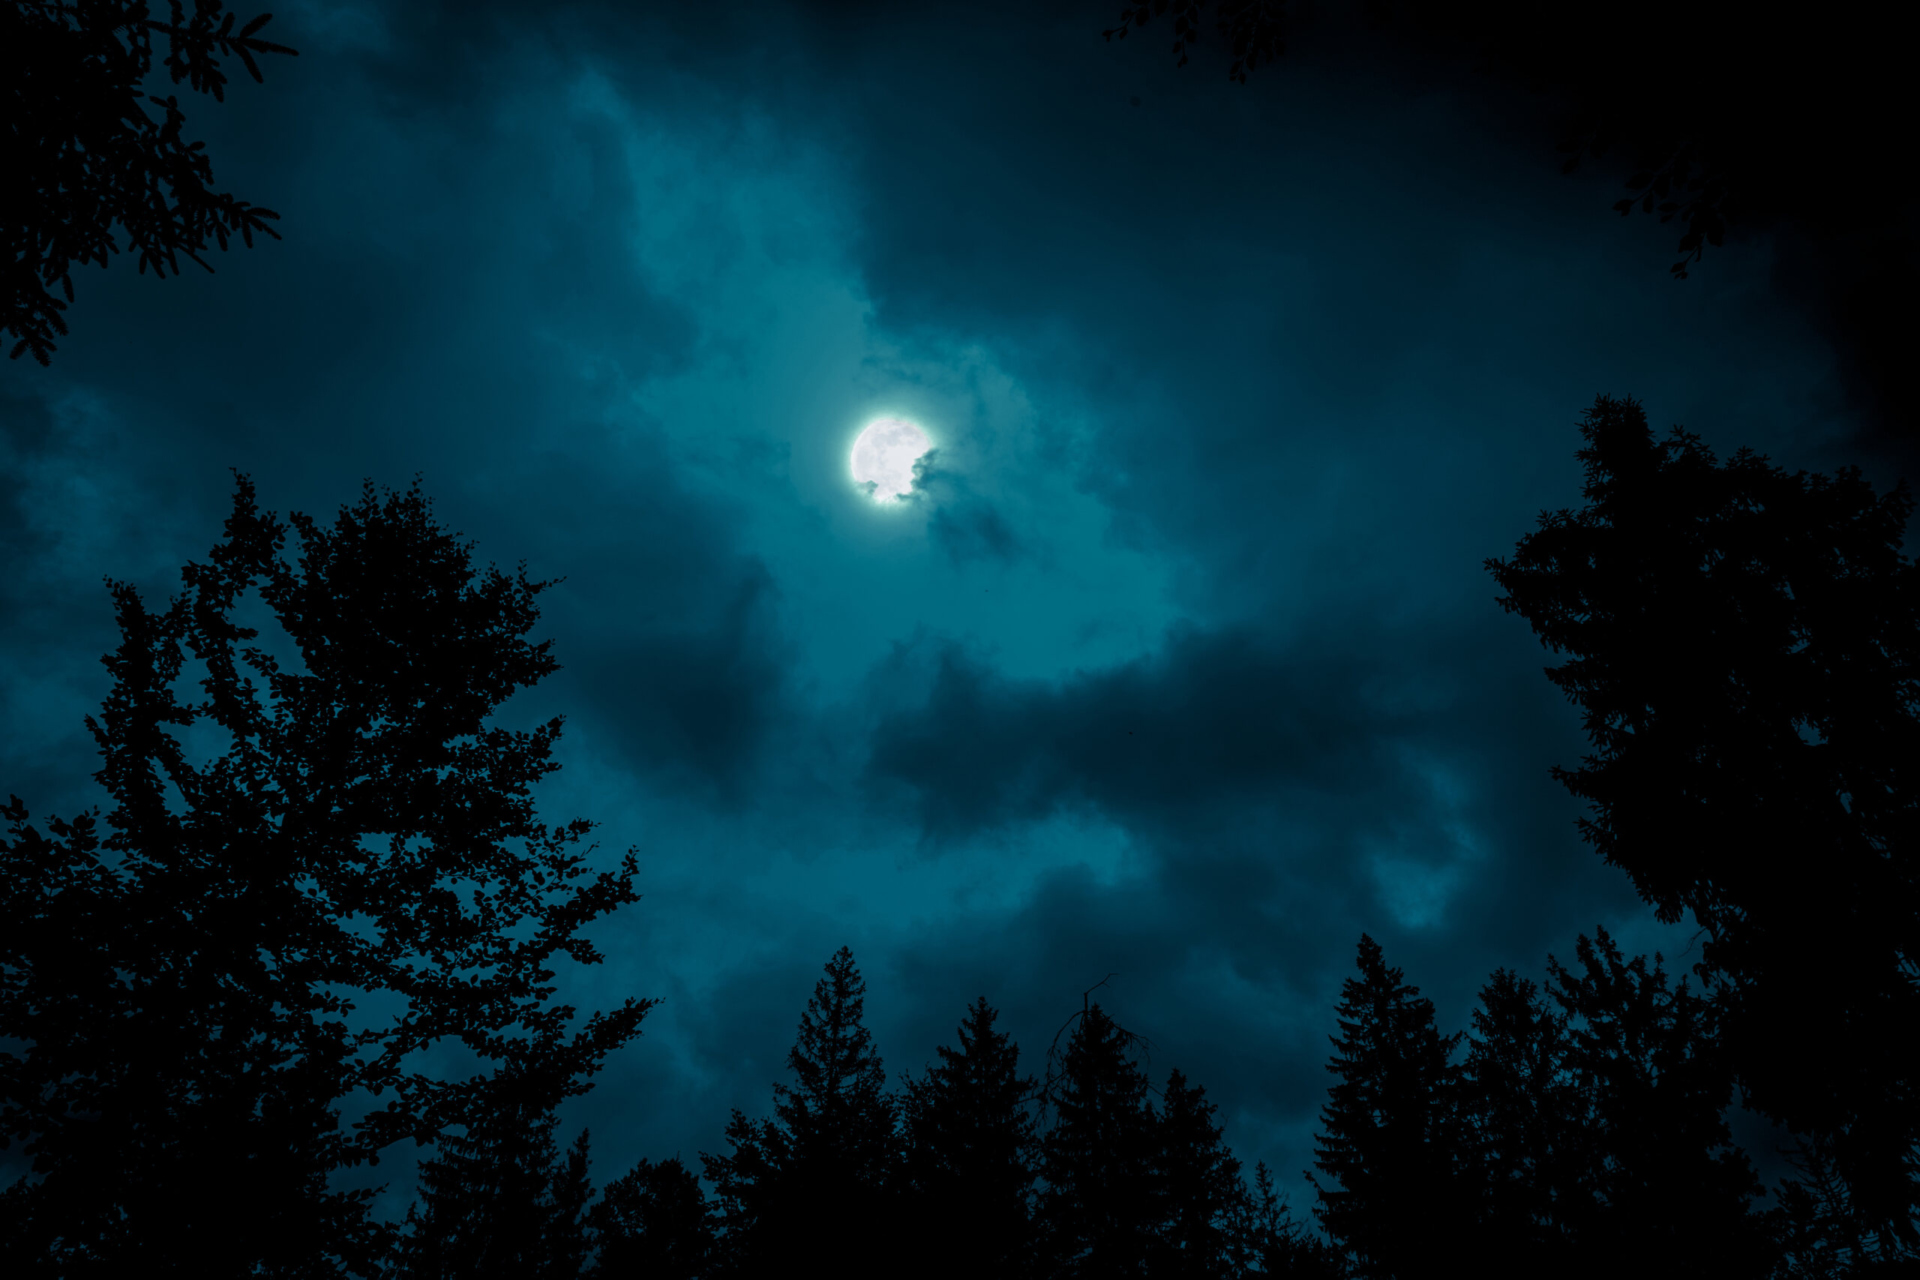 Night sky image looking up through the trees, the moon shines partially covered by clouds.